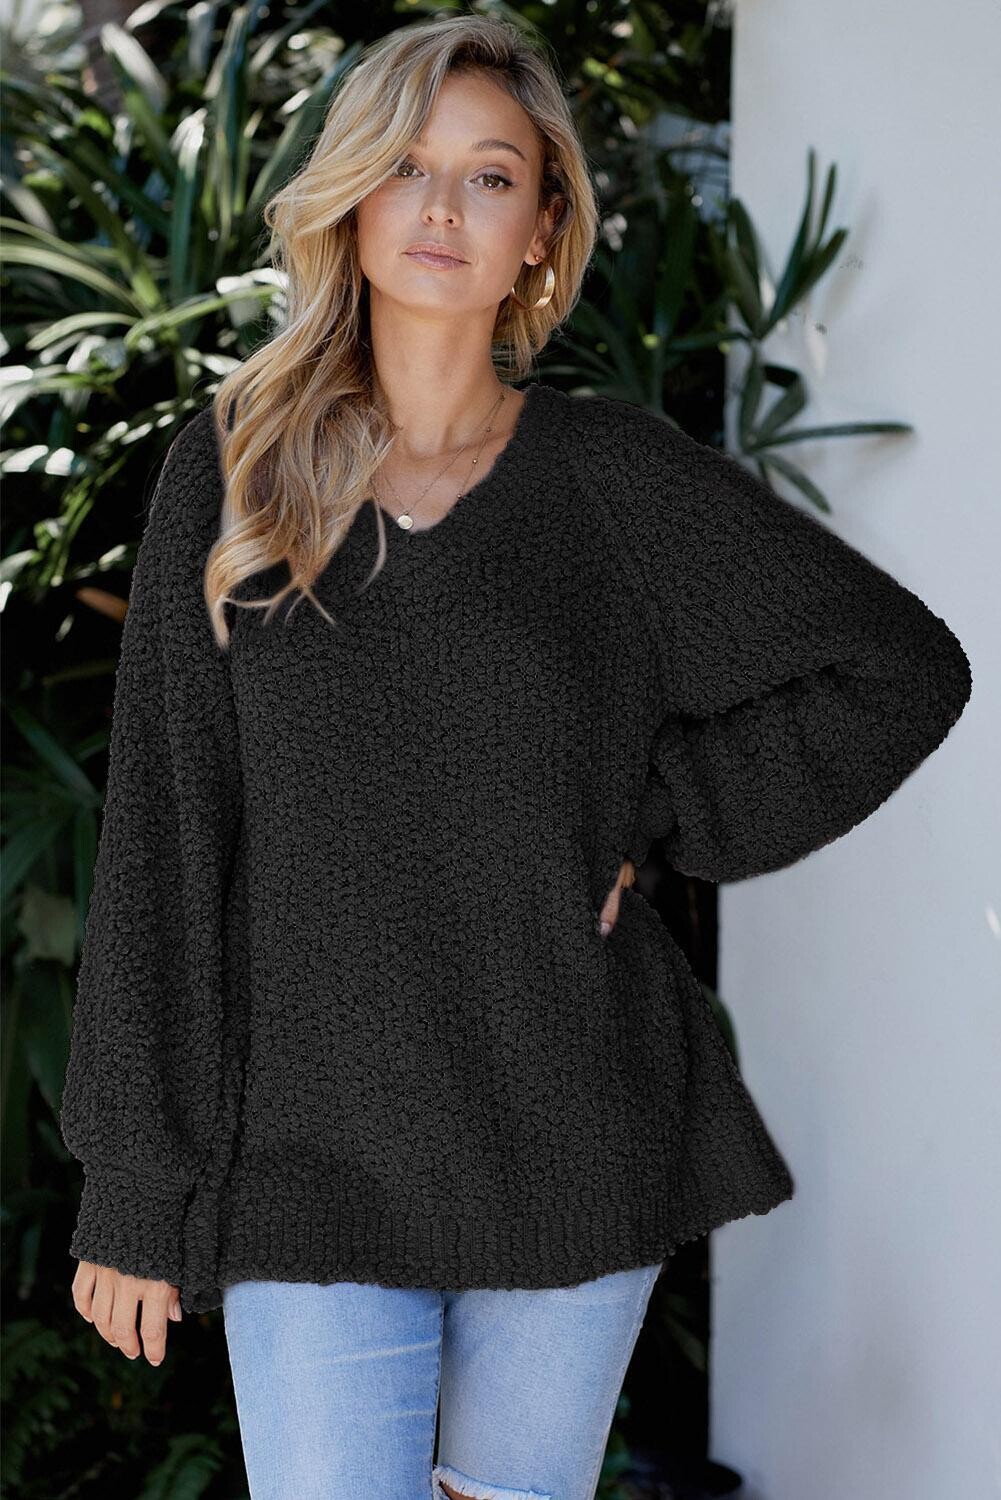 Black Chill in The Air Sweater